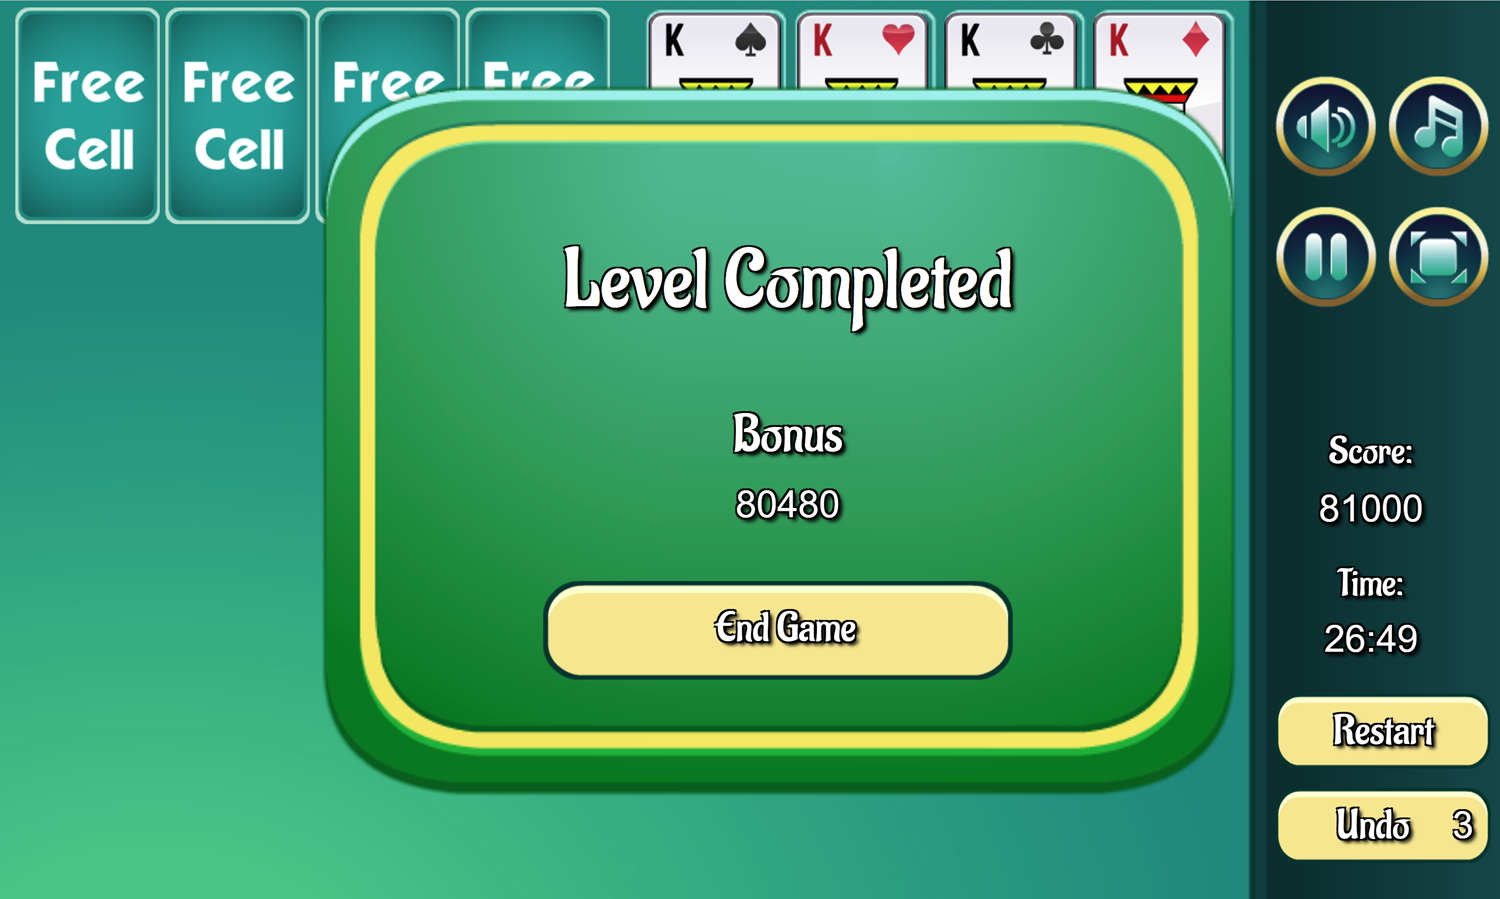 Challenge Freecell Game Level Completed Screen Screenshot.